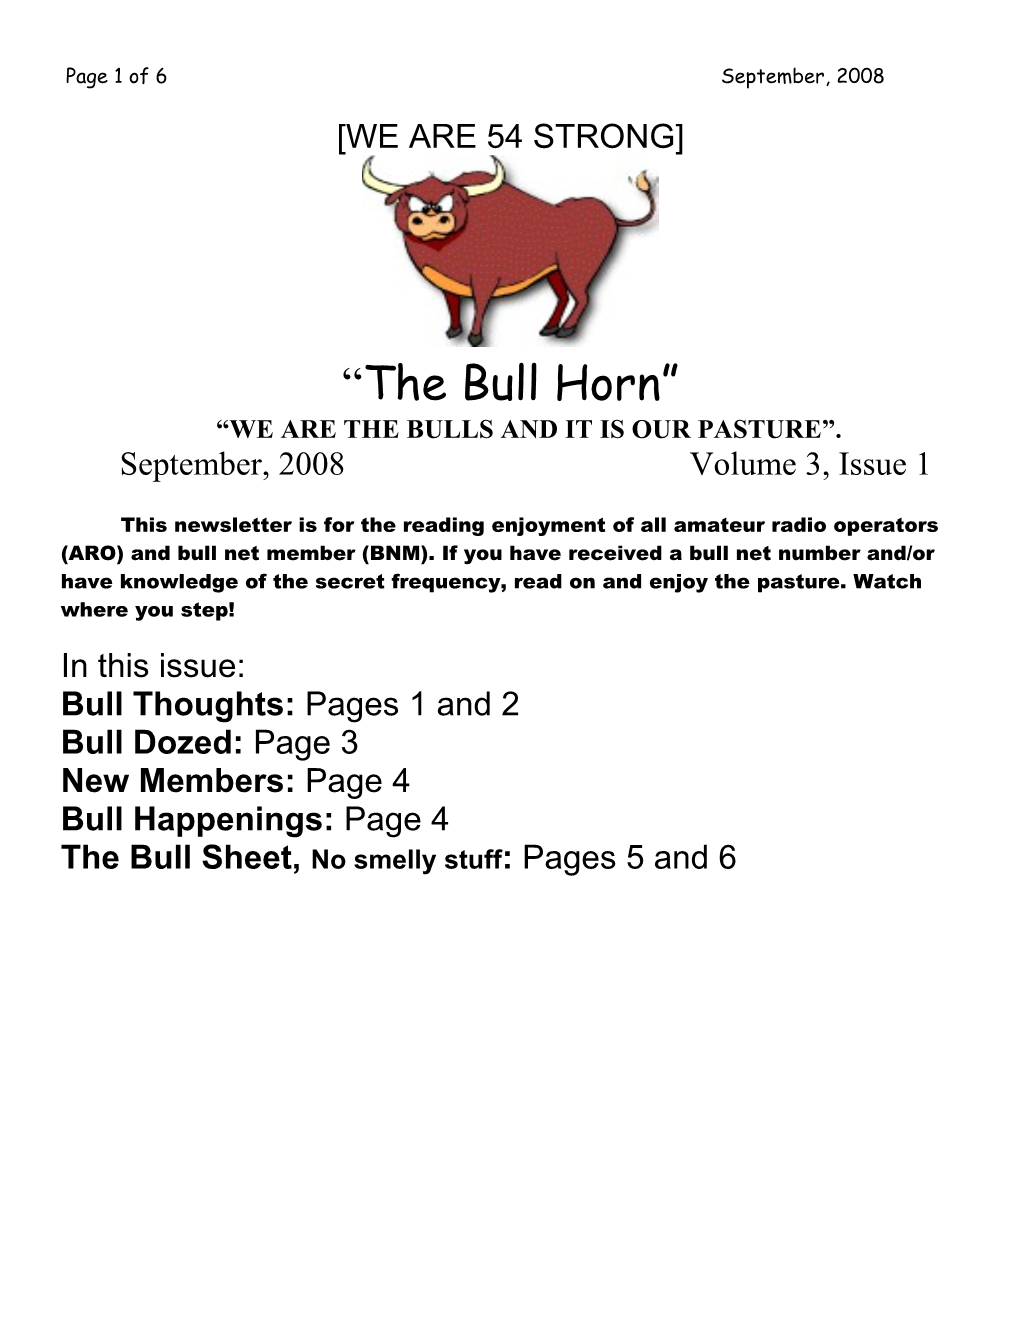 Bull Thoughts: Pages 1 and 2